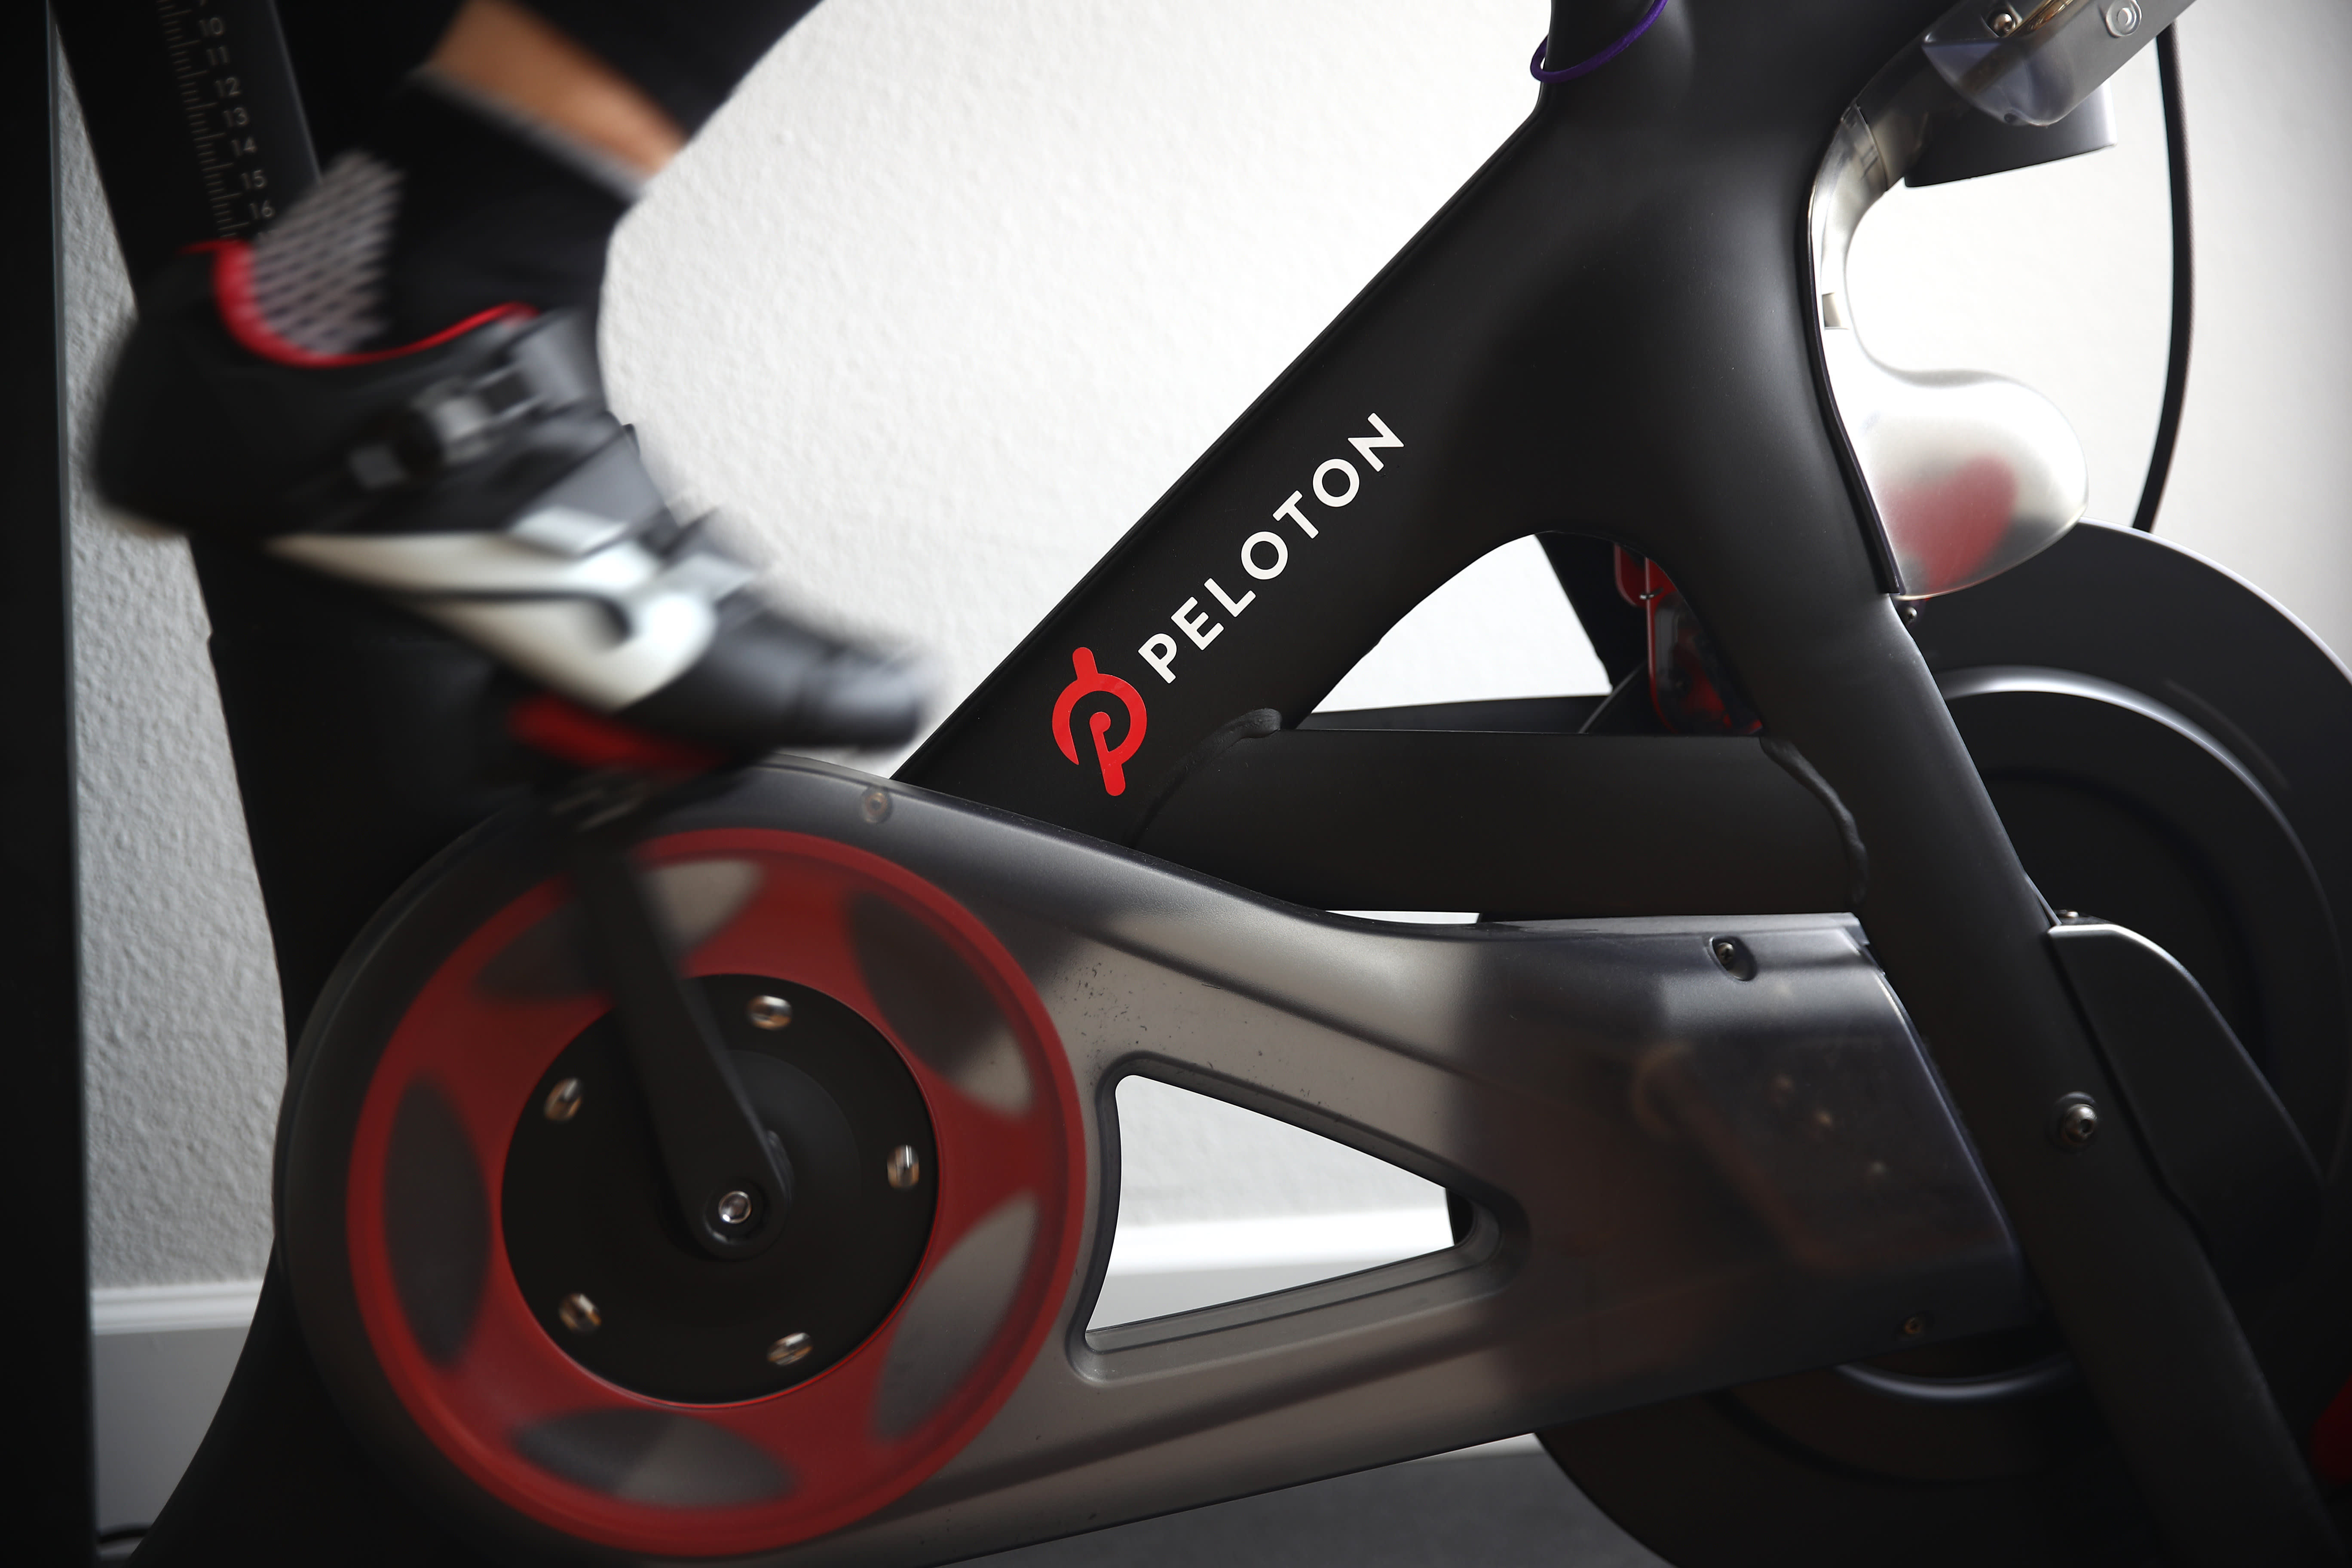 Software security company McAfee said it exposed a vulnerability in the Peloton Bike+ that allowed attackers to install malware through a USB port and